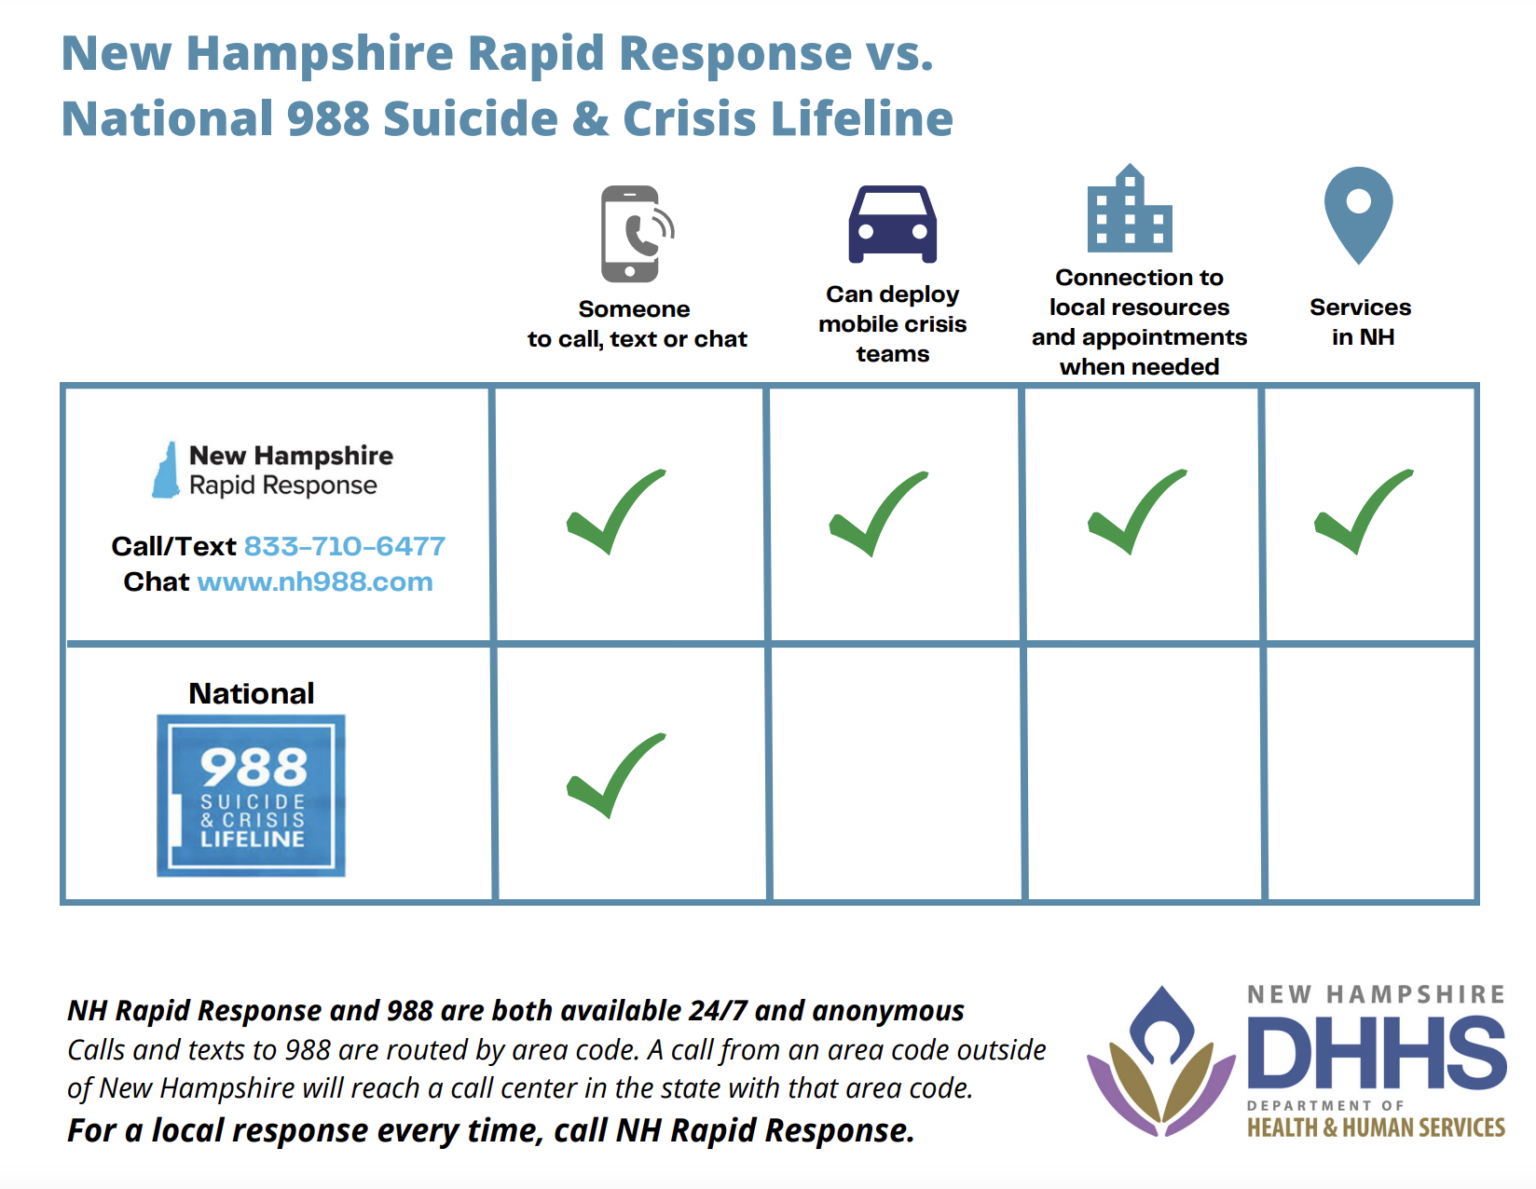 The New Hampshire Rapid Response mental health crisis hotline remains in place since the launch of National 988 Suicide and Crisis Lifeline. For Granite Staters with out-of-state phone numbers, calling the state’s hotline directly is the fastest way to get local help in an emergency.